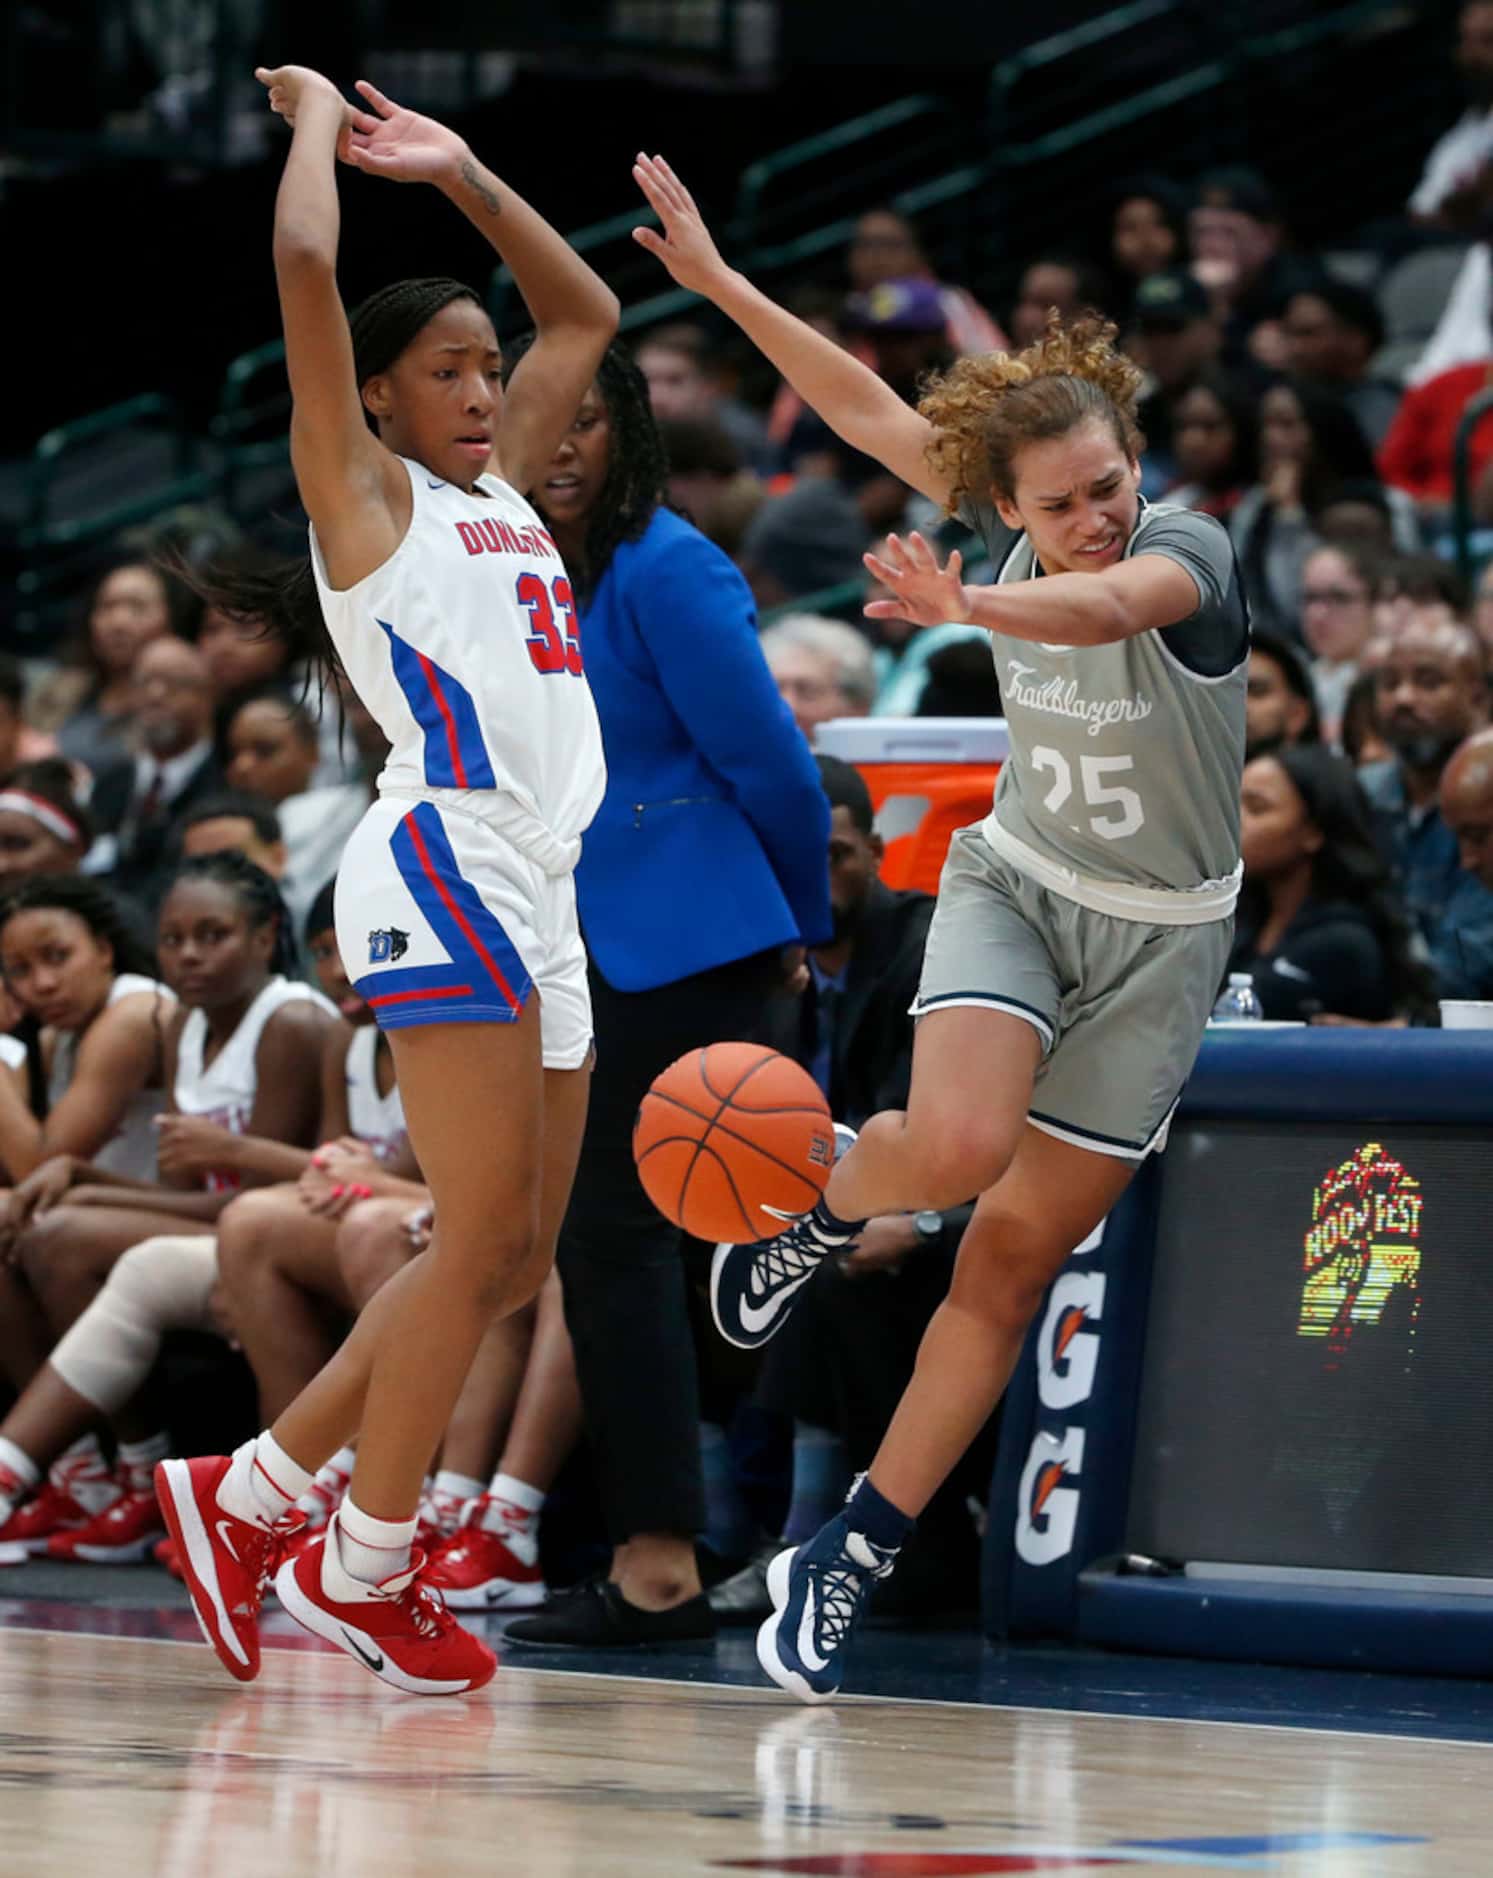 Duncanville's Nyah Wilson (33) fouls Sierra Canyon's Ashley Chevalier (25) during their high...